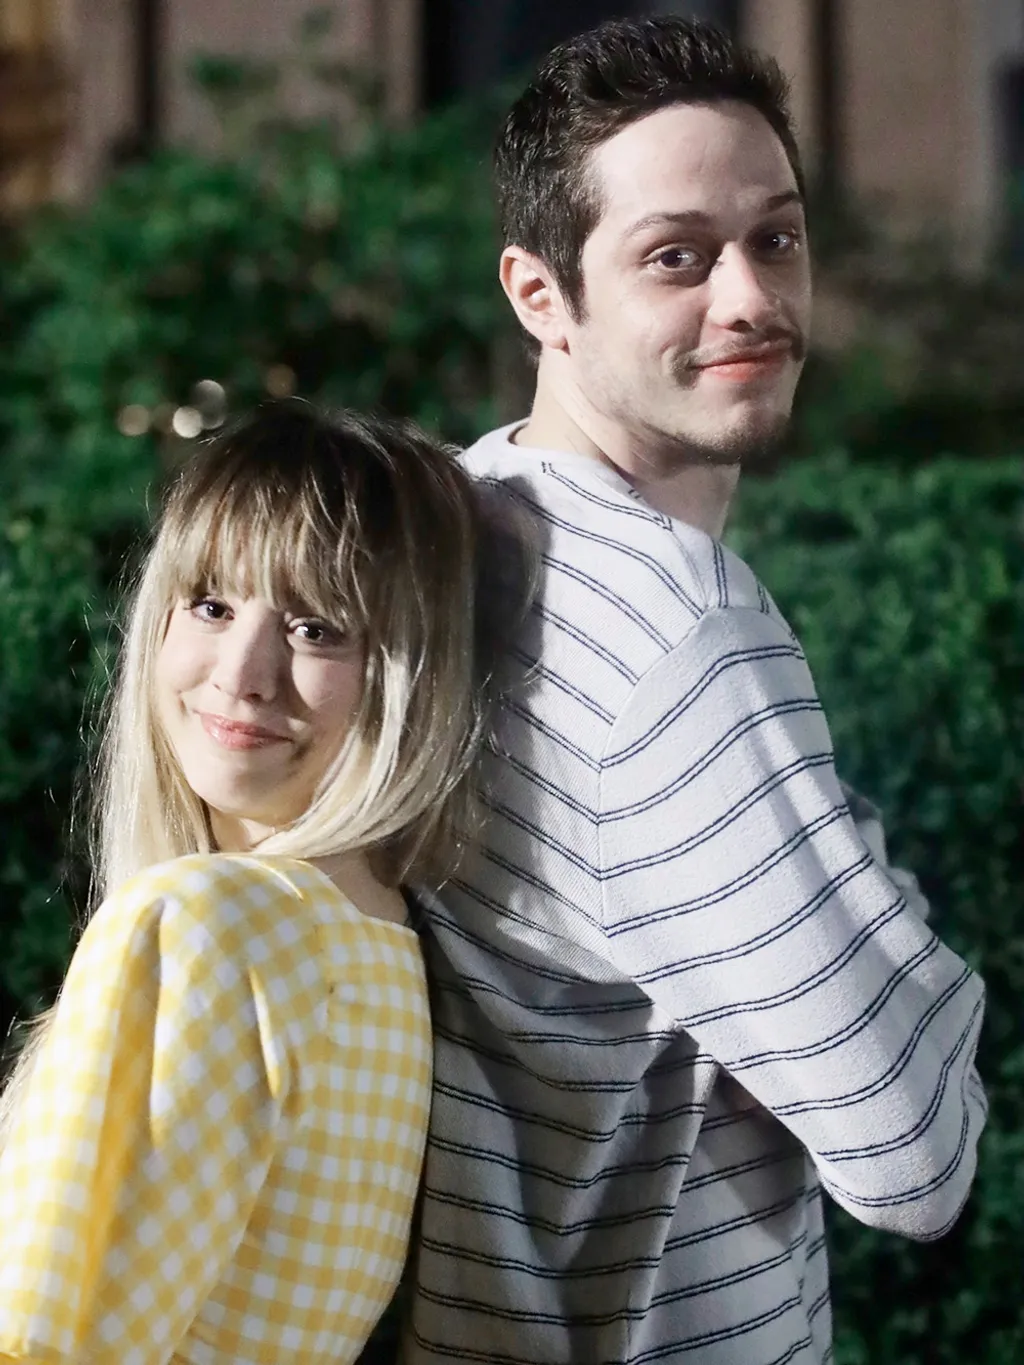 EXCLUSIVE: Kaley Cuoco , Pete Davidson filming "Meet Cute" Kaley Cuoco Pete Davidson Photo Credit Meet Cute new film photo New York Newswire 21-PETE DAVIDSON amazing chemistry takes of Alex Lehmann story Sands fees concept permission wounds authorized age